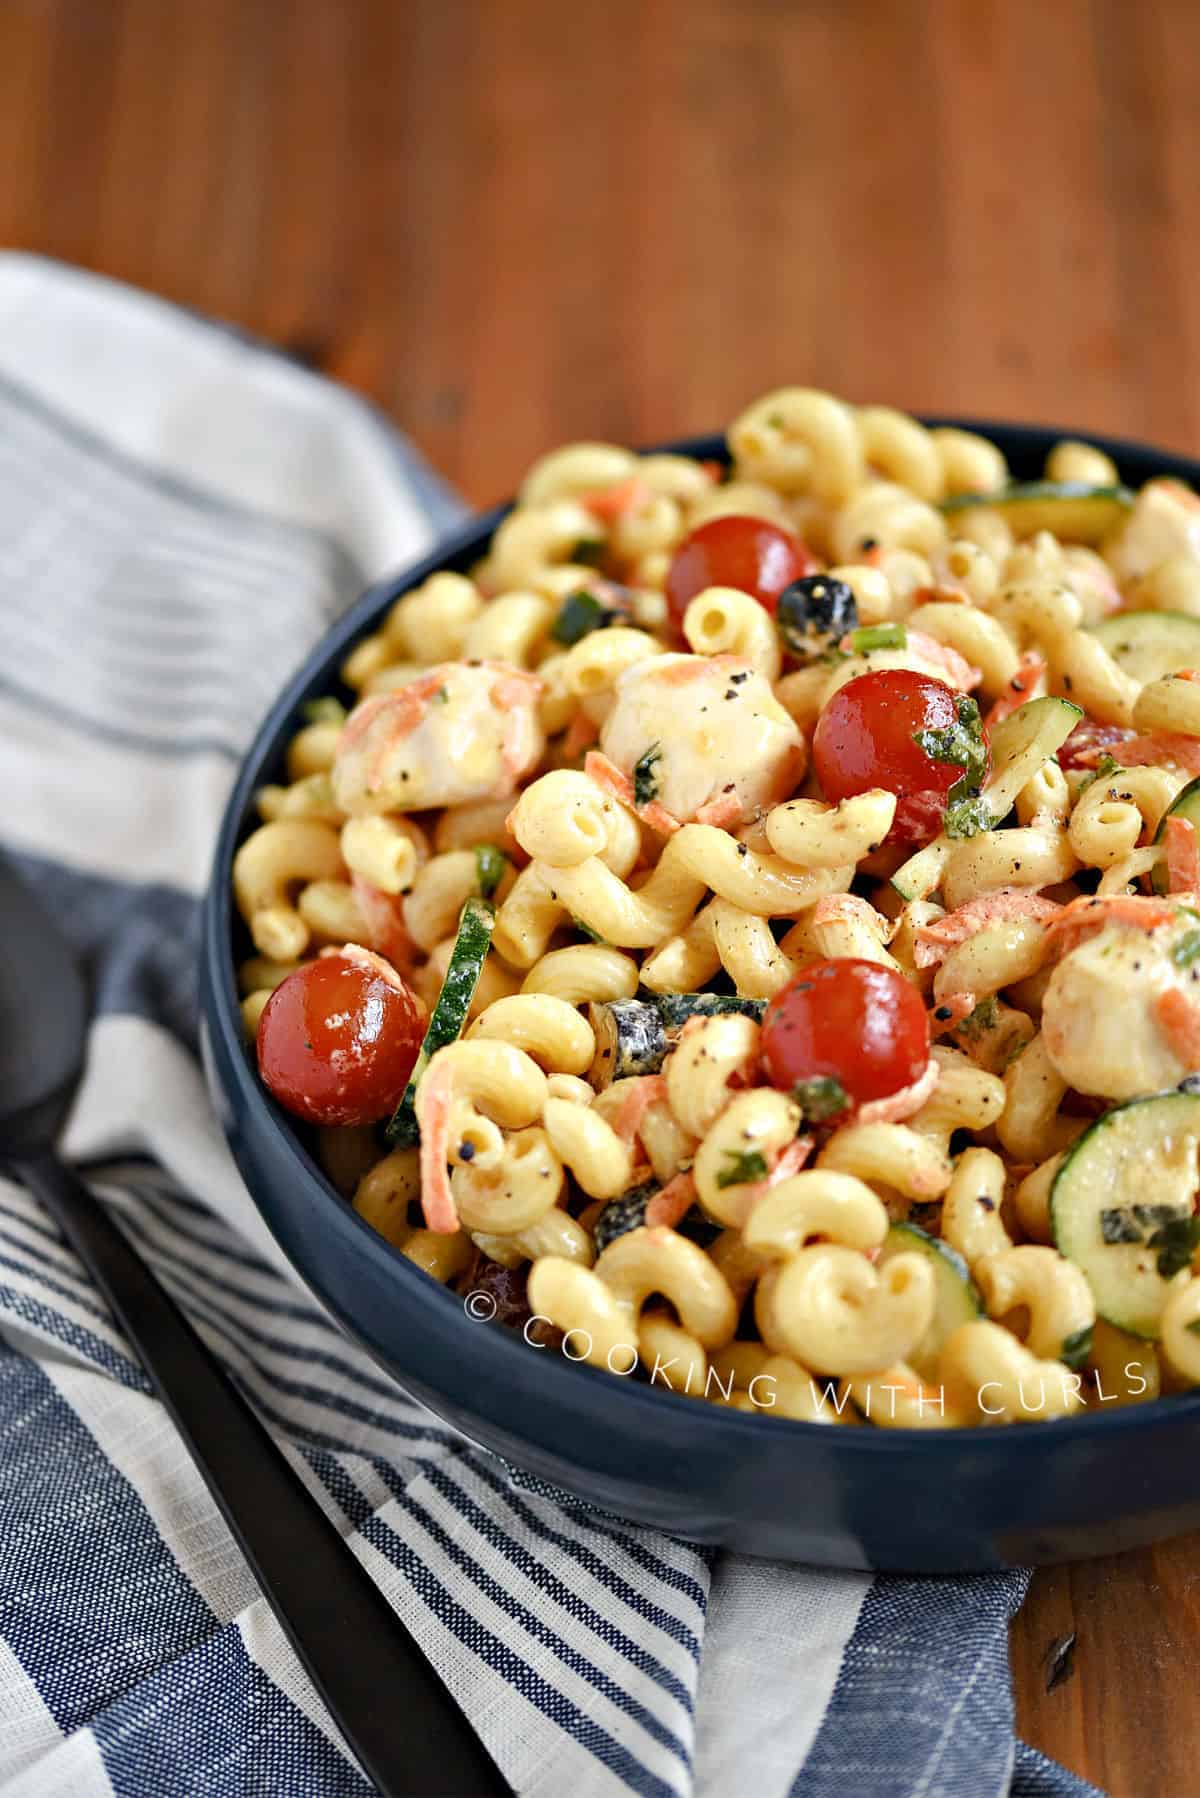 Spiral pasta, mozzarella cheese, cherry tomatoes, zucchini and black olives mixed together in a blue bowl.